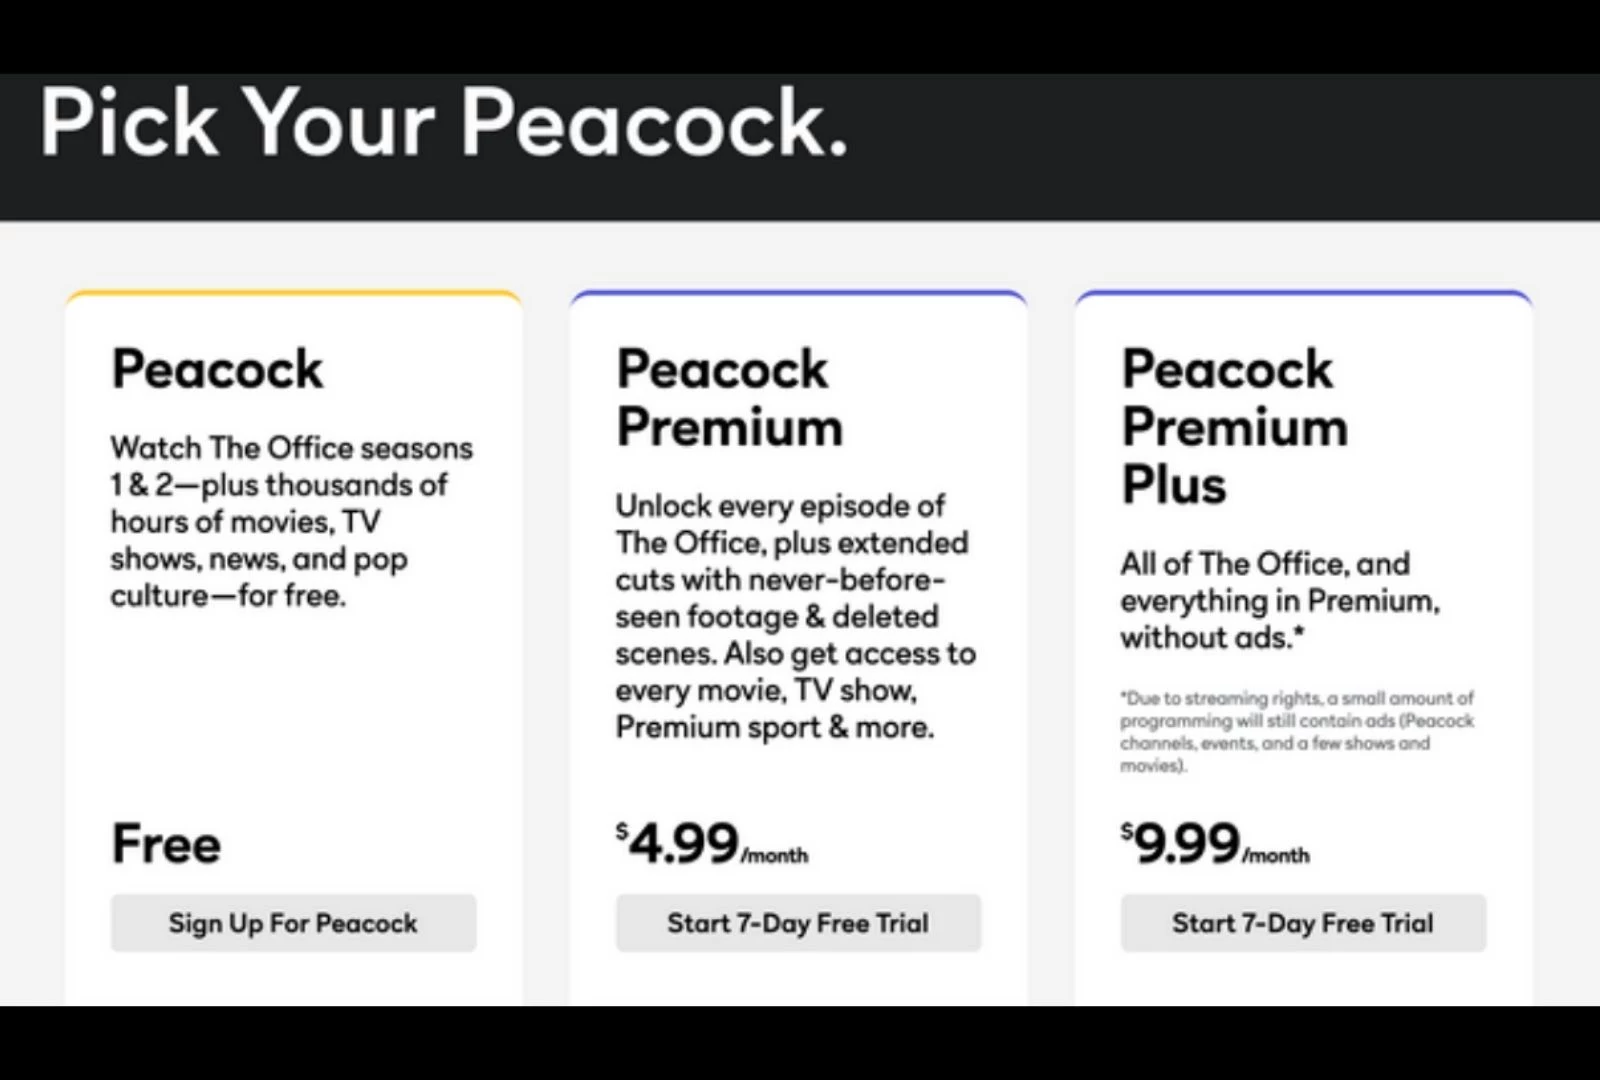 Peacock’s Pricing Tiers Are Based On Access To ‘The Office’